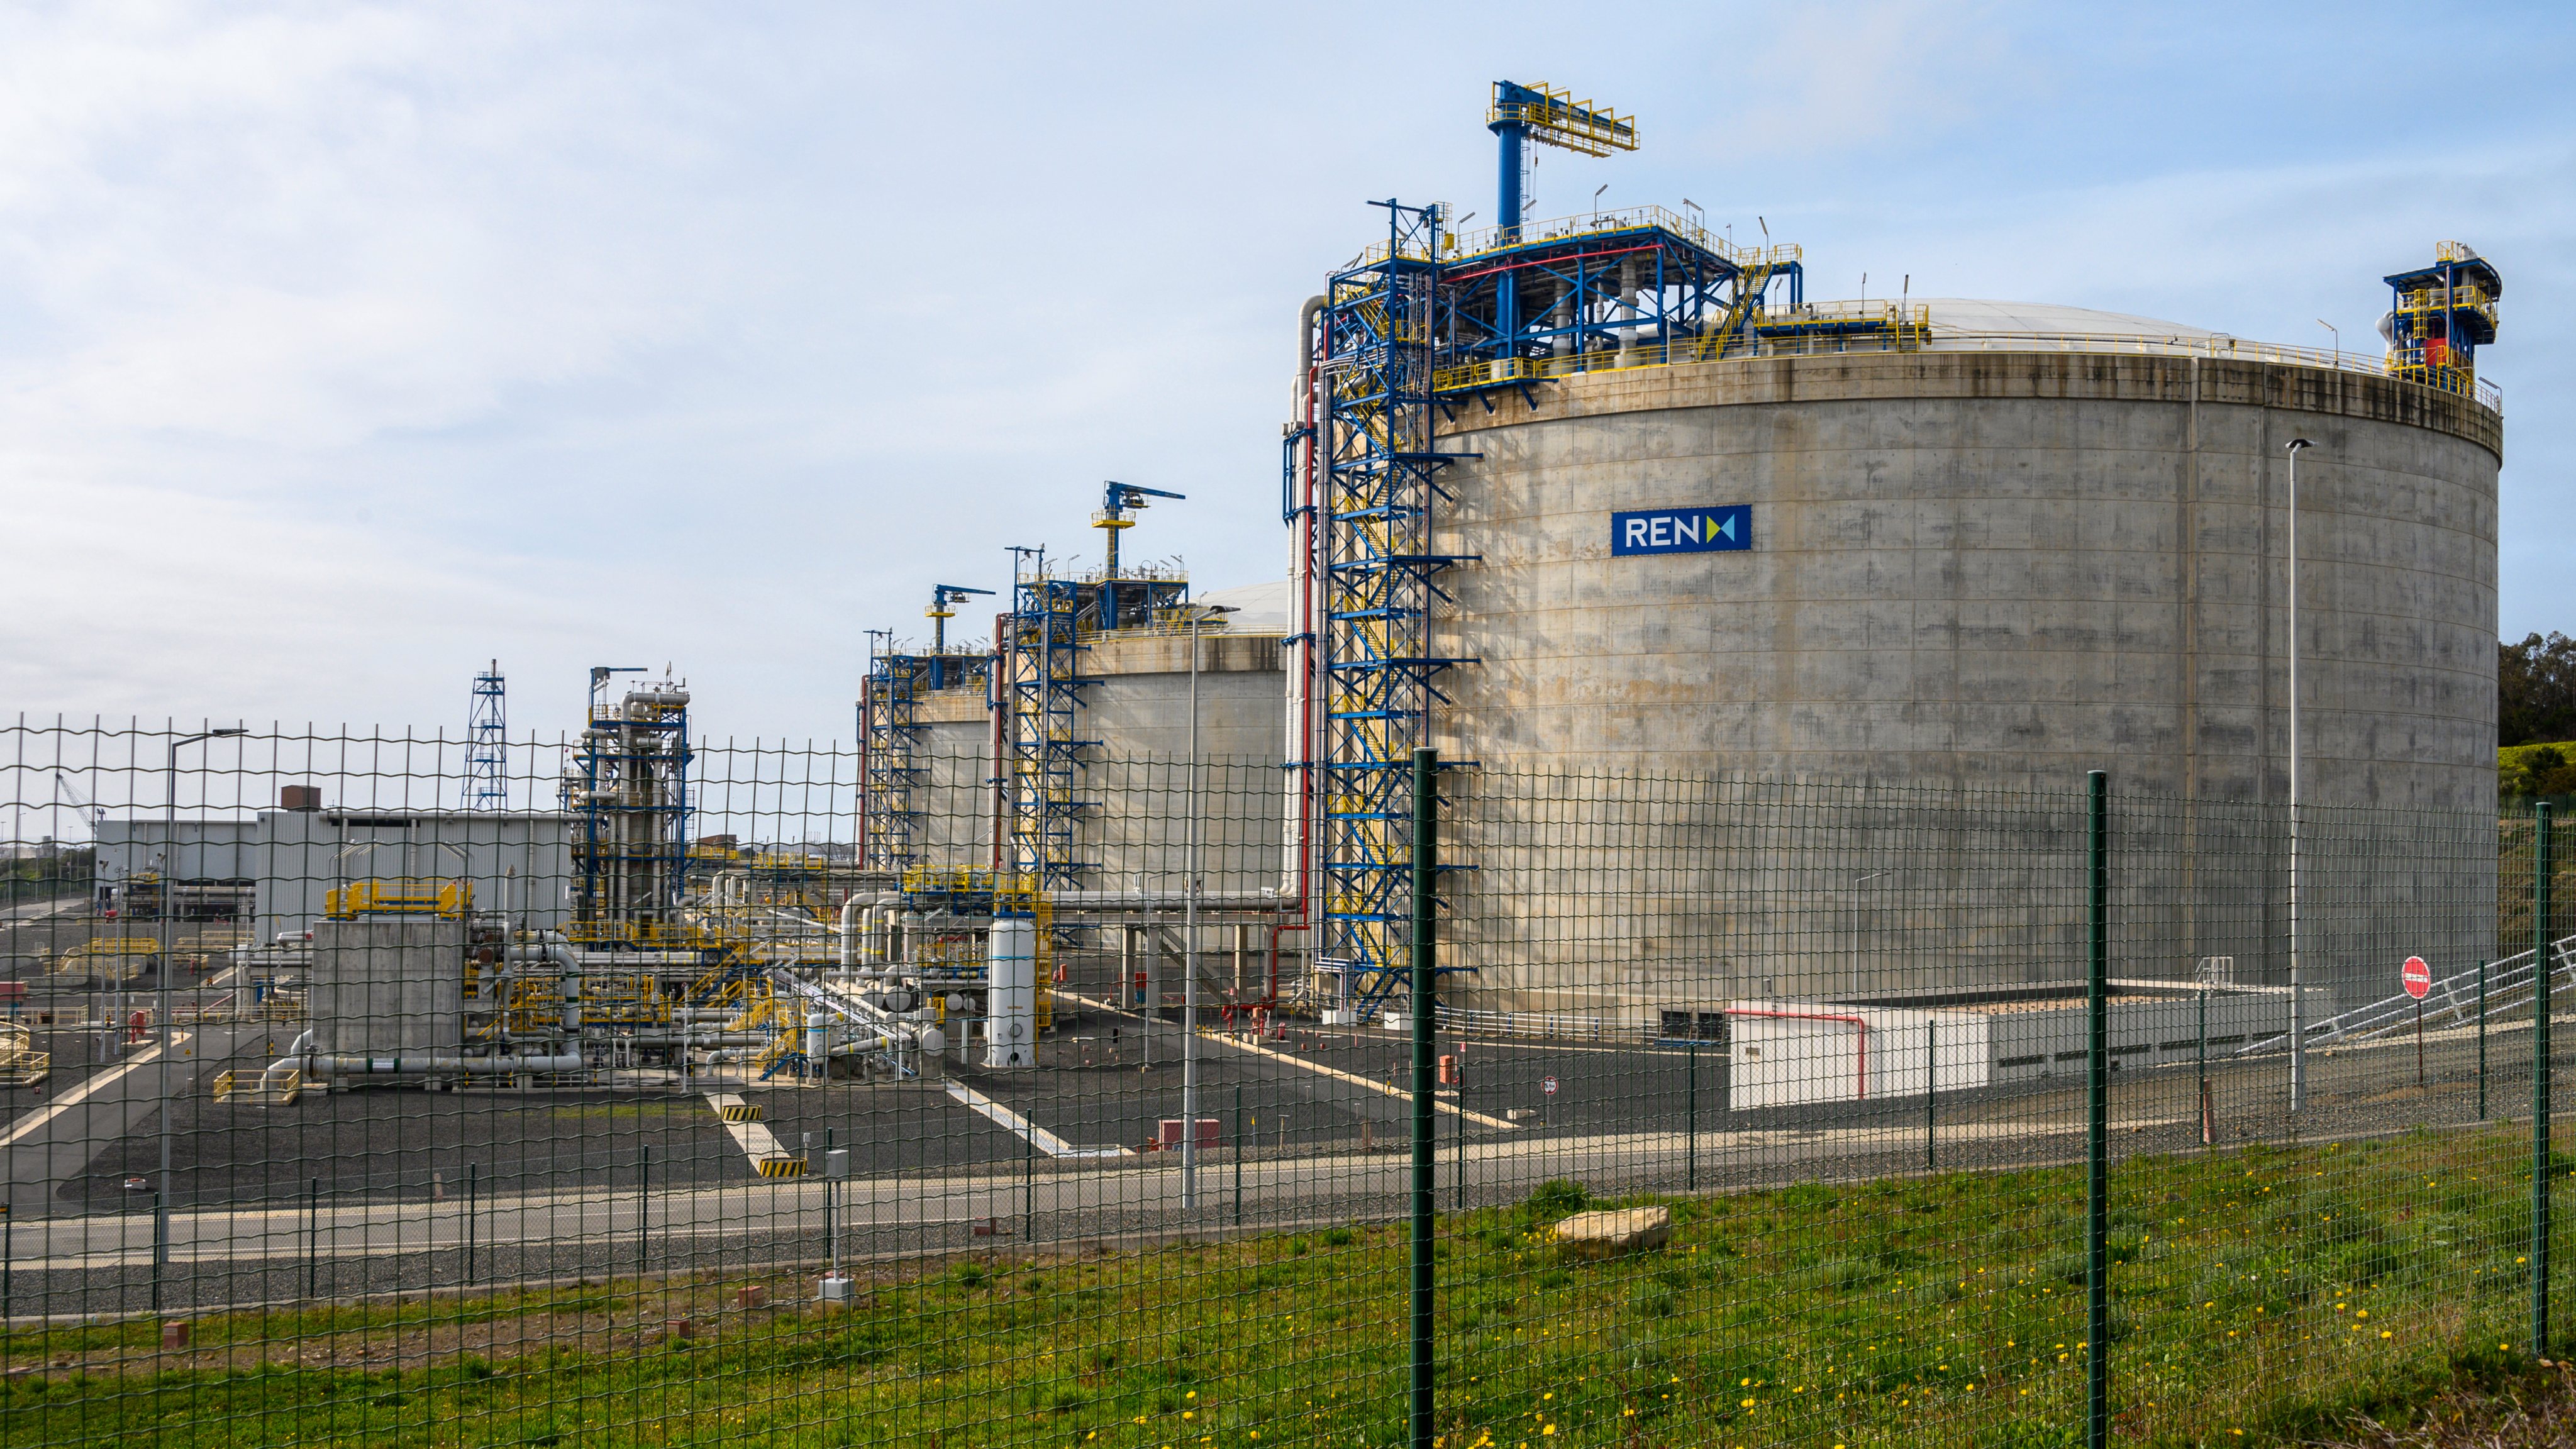 REN Liquified Natural Gas terminal in the Port of Sines, Portugal